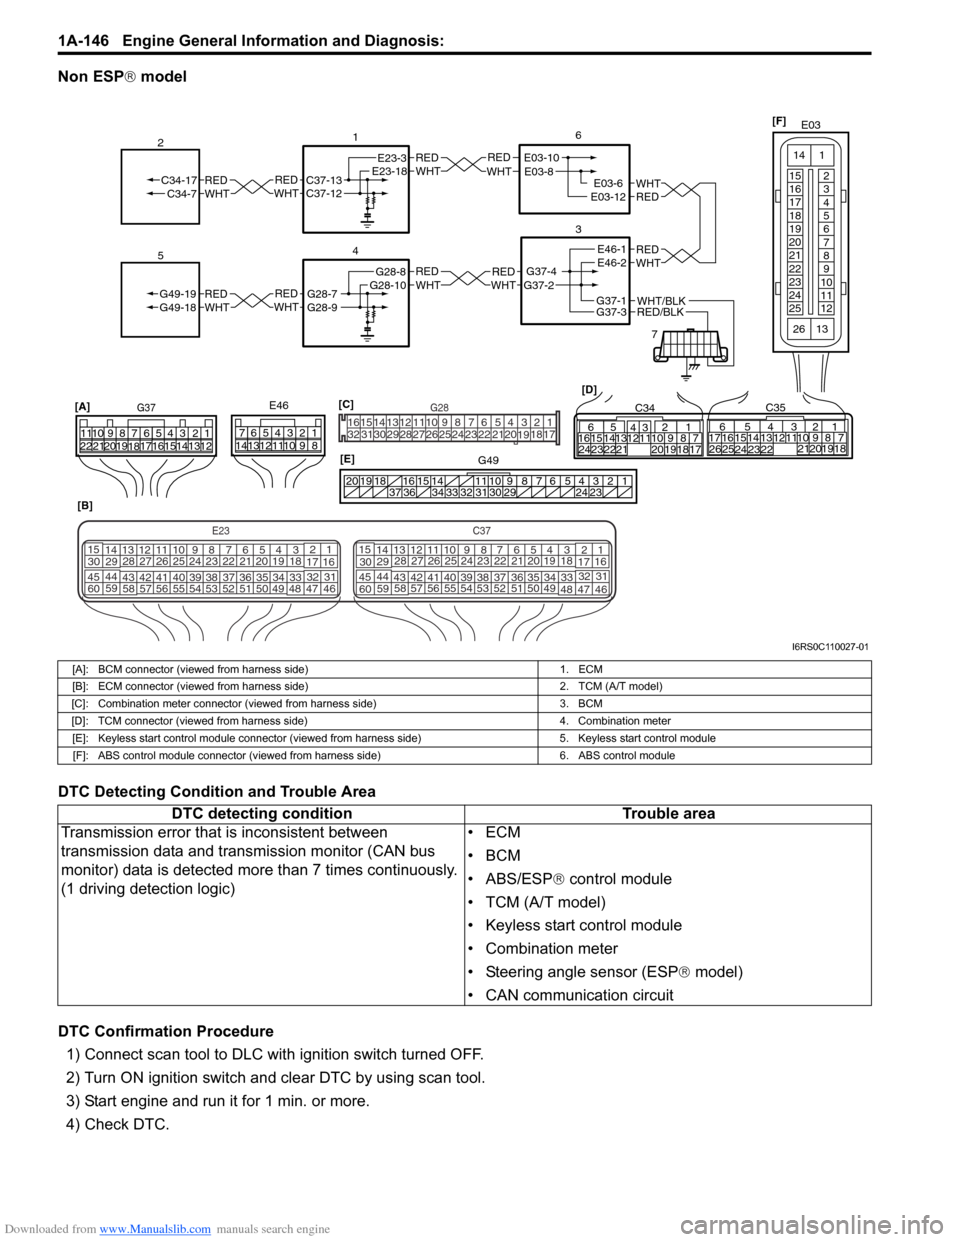 SUZUKI SWIFT 2006 2.G Service Workshop Manual Downloaded from www.Manualslib.com manuals search engine 1A-146 Engine General Information and Diagnosis: 
Non ESP® model
DTC Detecting Condition and Trouble Area
DTC Confirmation Procedure 1) Connec